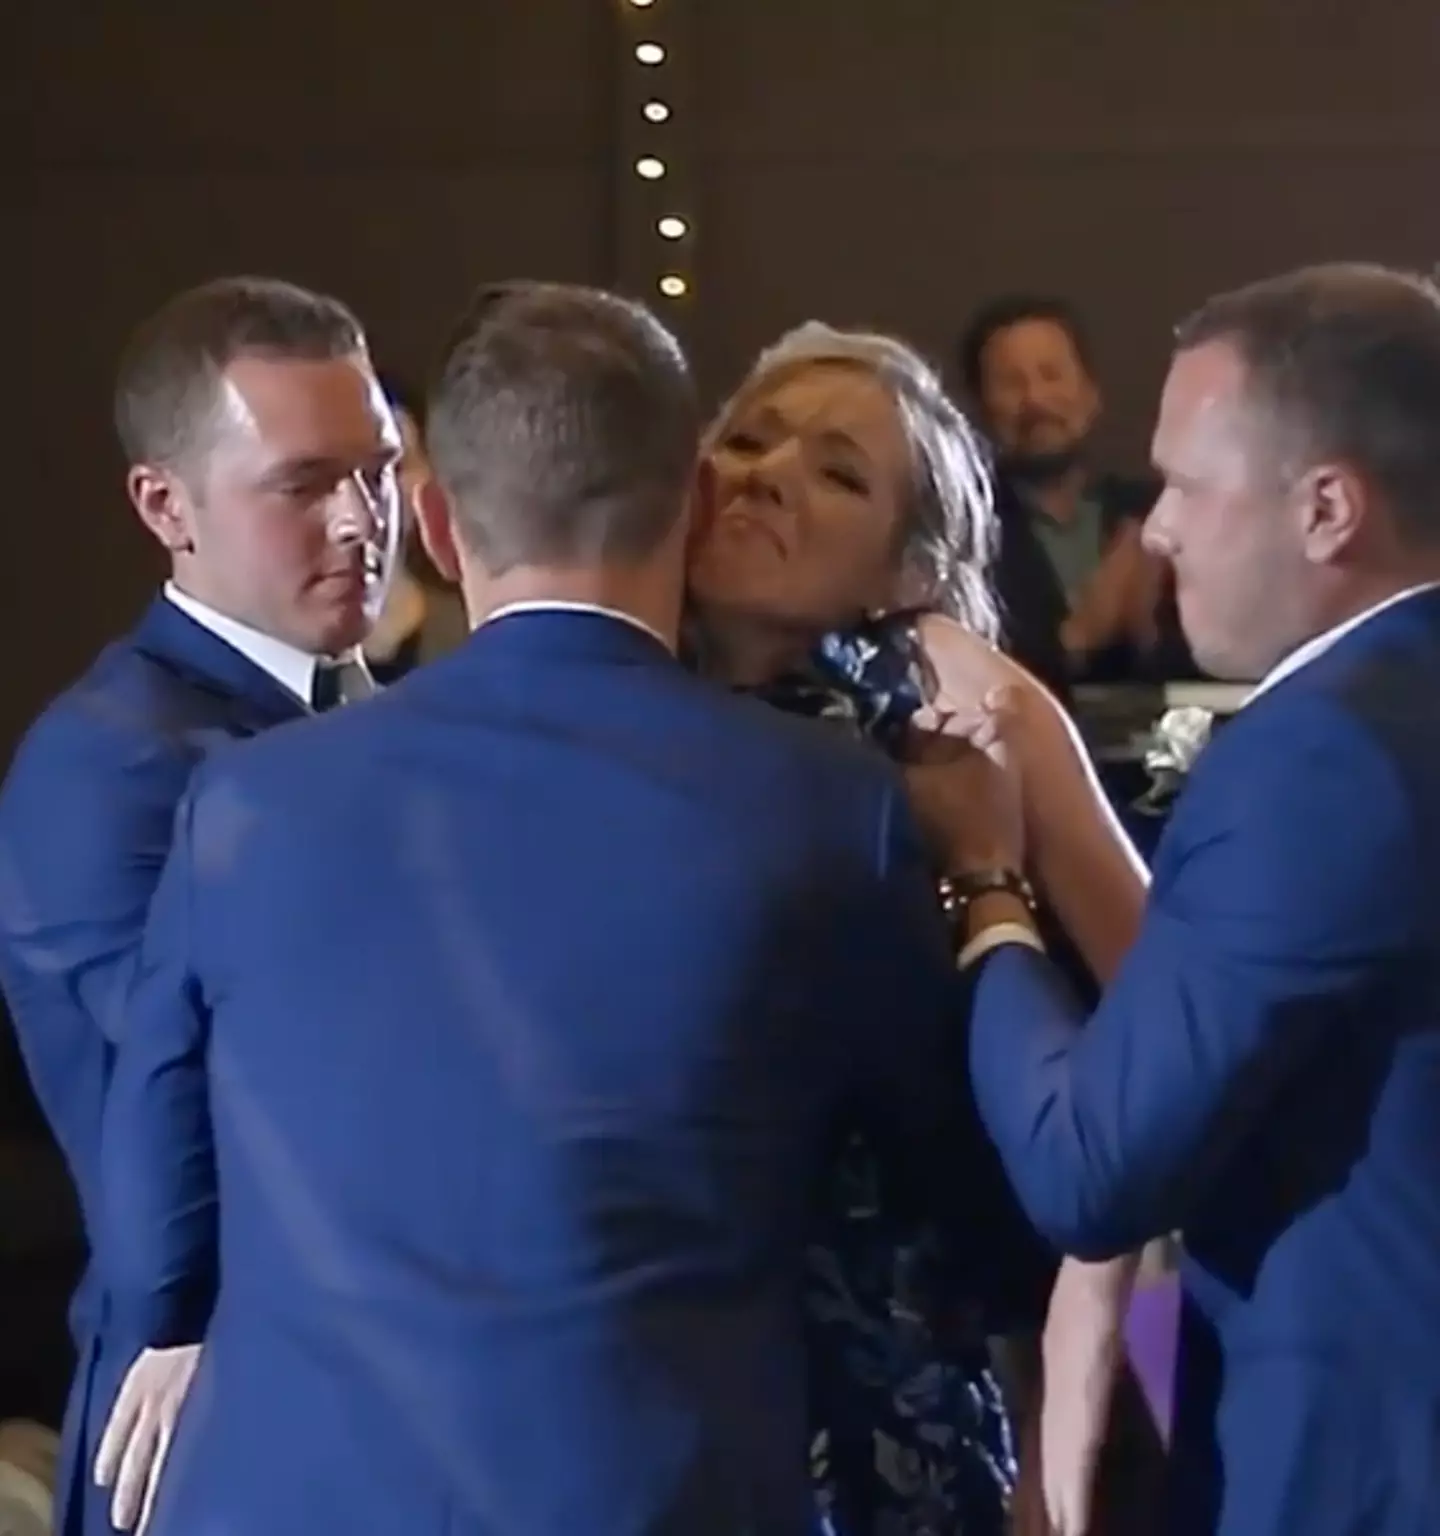 Zak Poirier was determined to dance with his mum at his wedding.